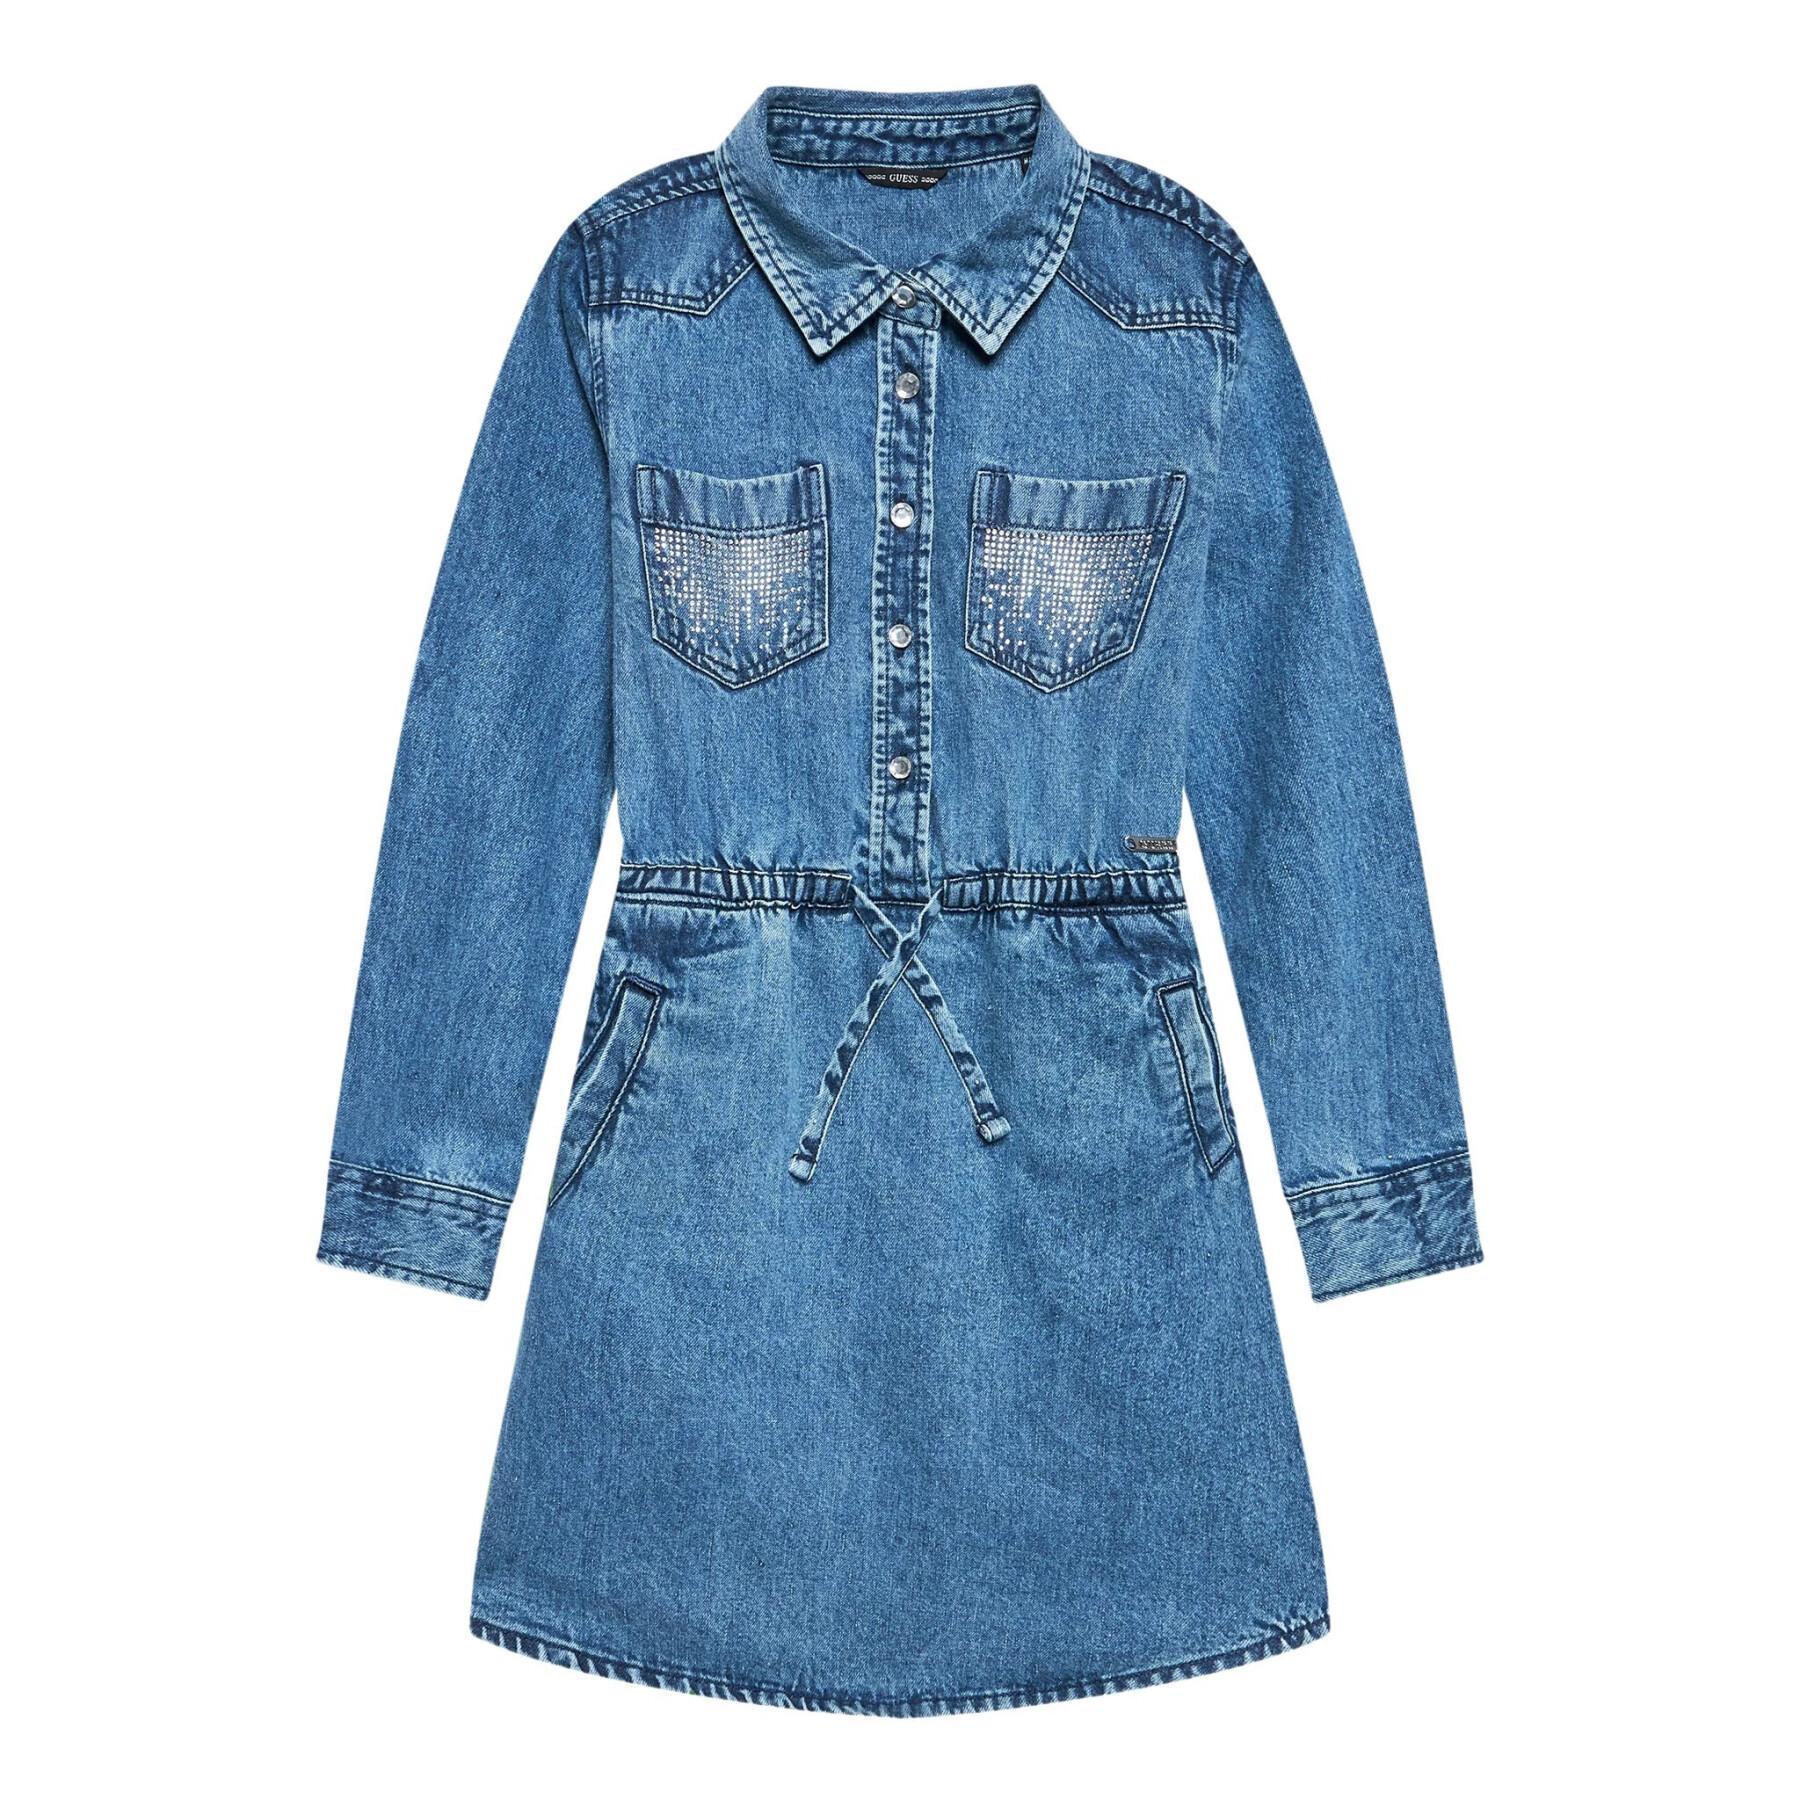 Girl's jeans dress Guess